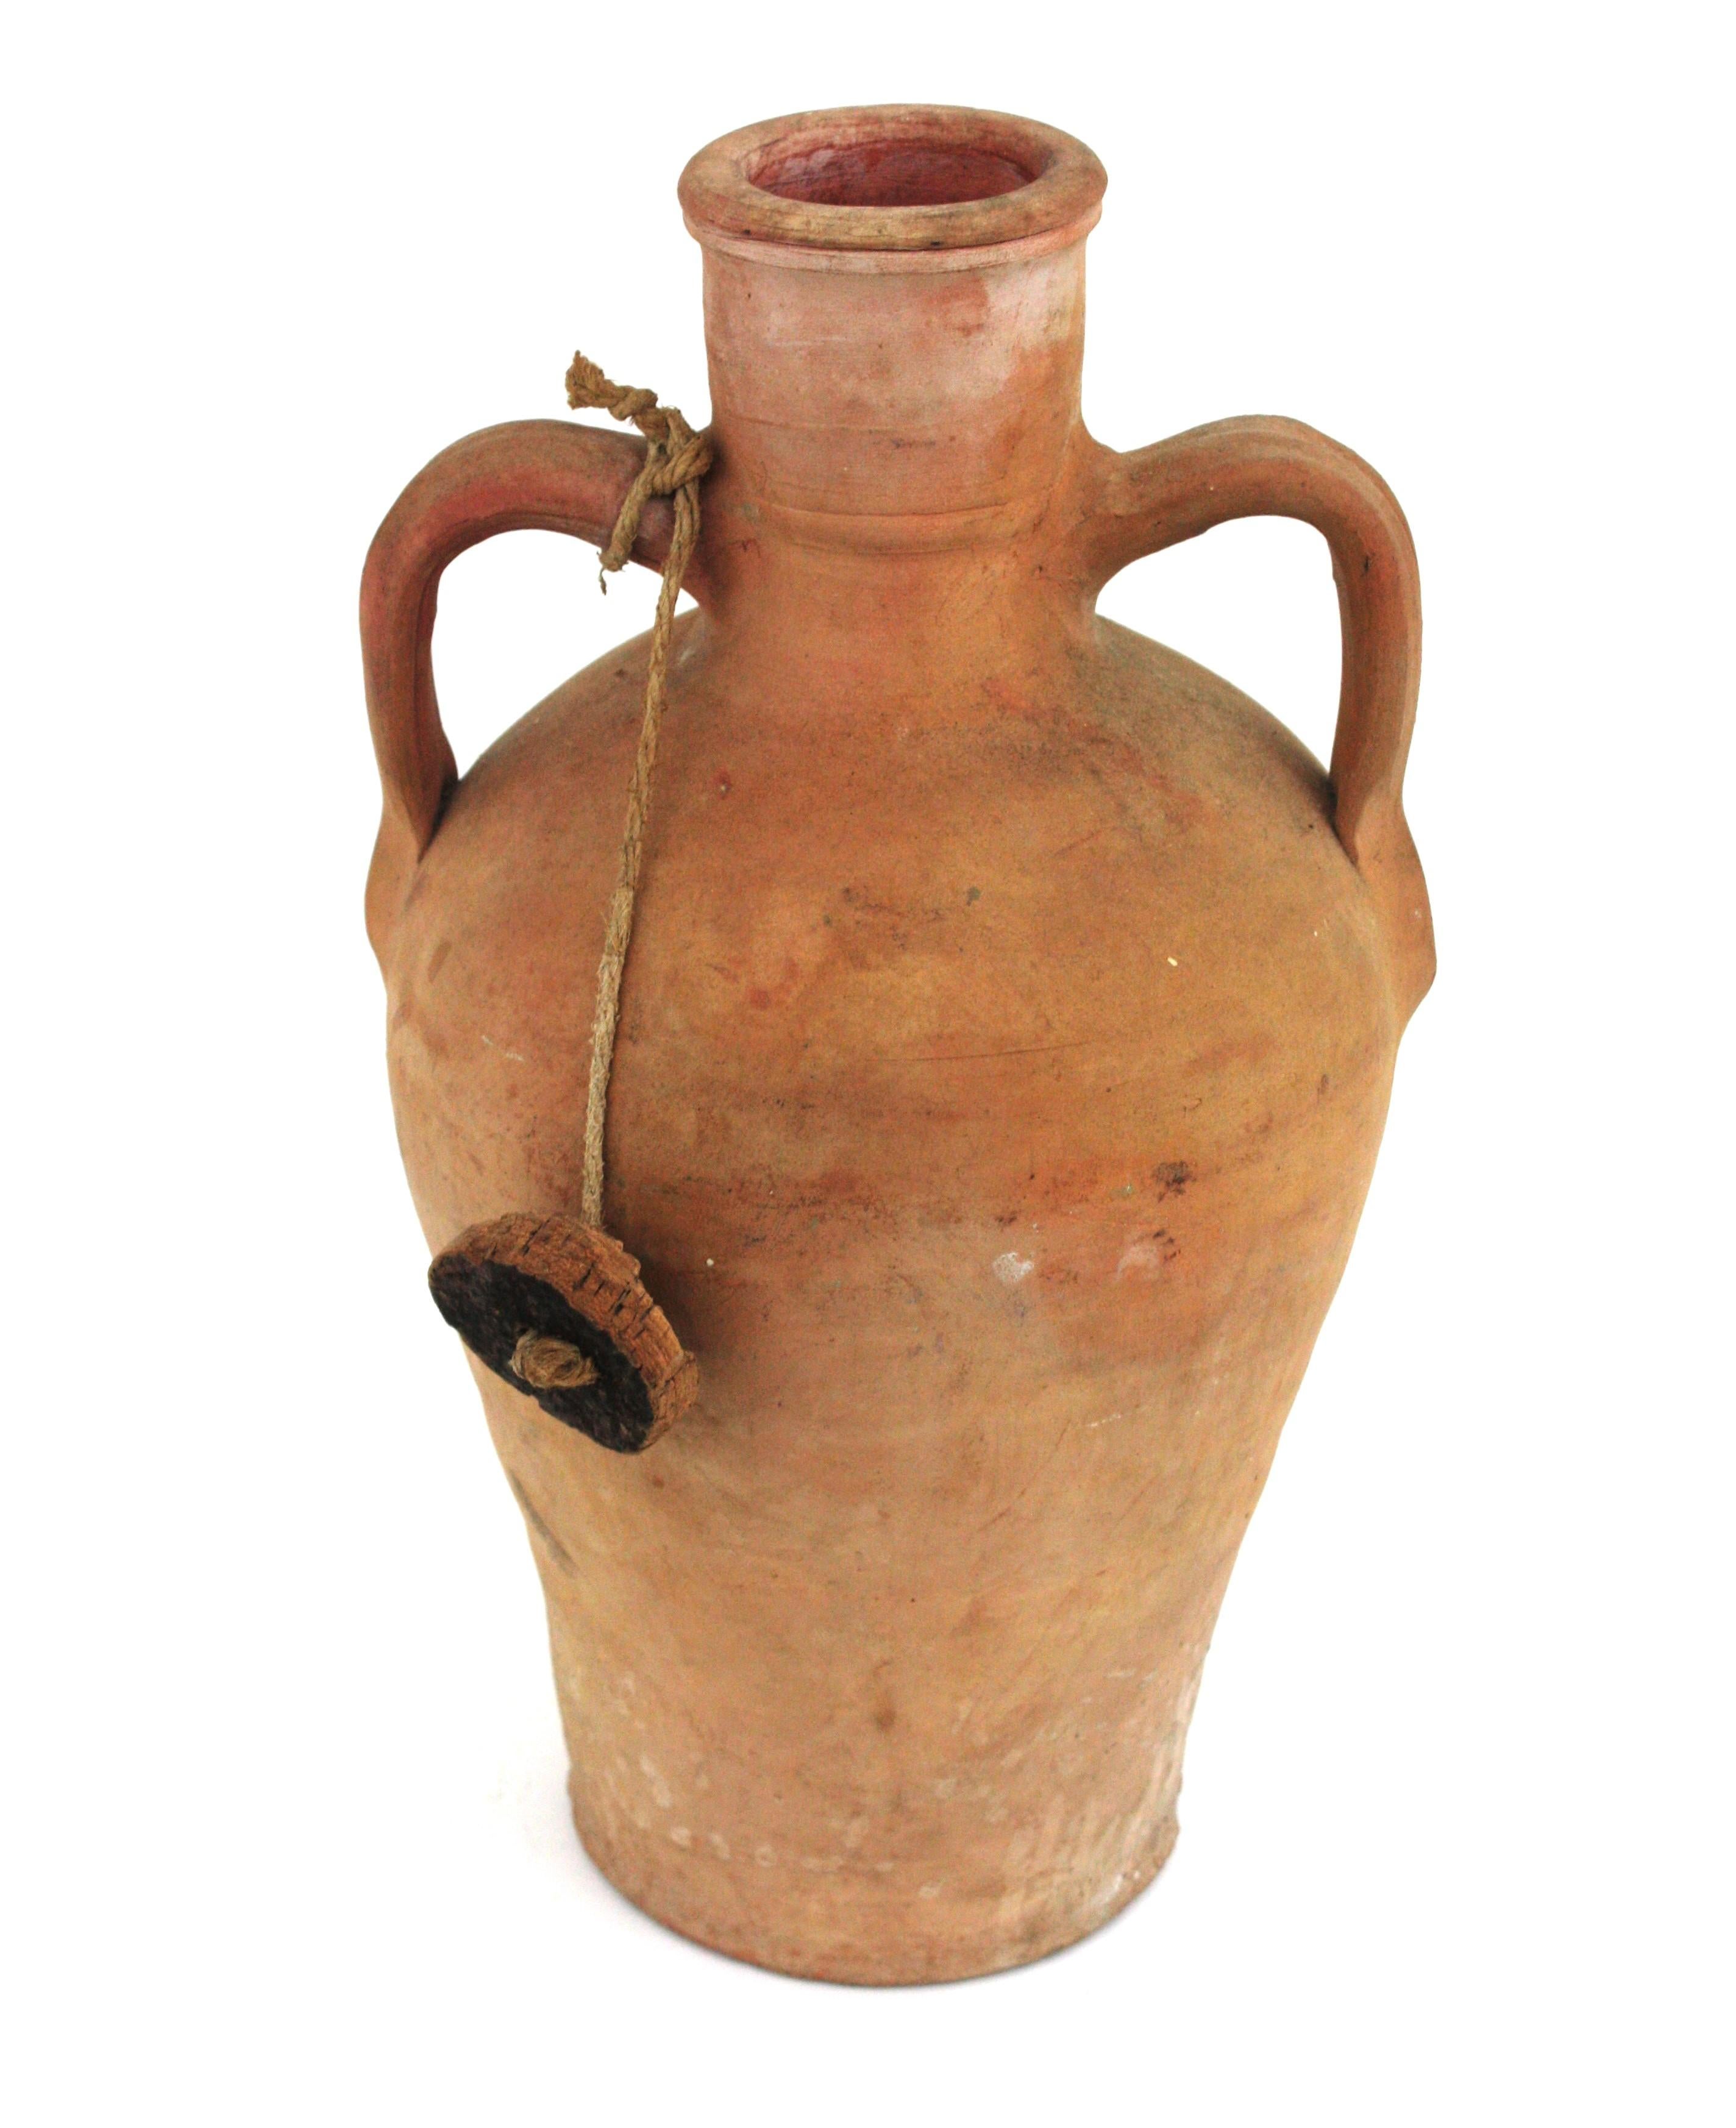 Handmade terracotta two-handled water jar with cork lid, Spain 1930s-1940s.
Traditional Spanish terracotta pitcher. Unglazed exterior and interior with handles at both sides. Used as water container. 
Use it as decorative vessel to add a natural